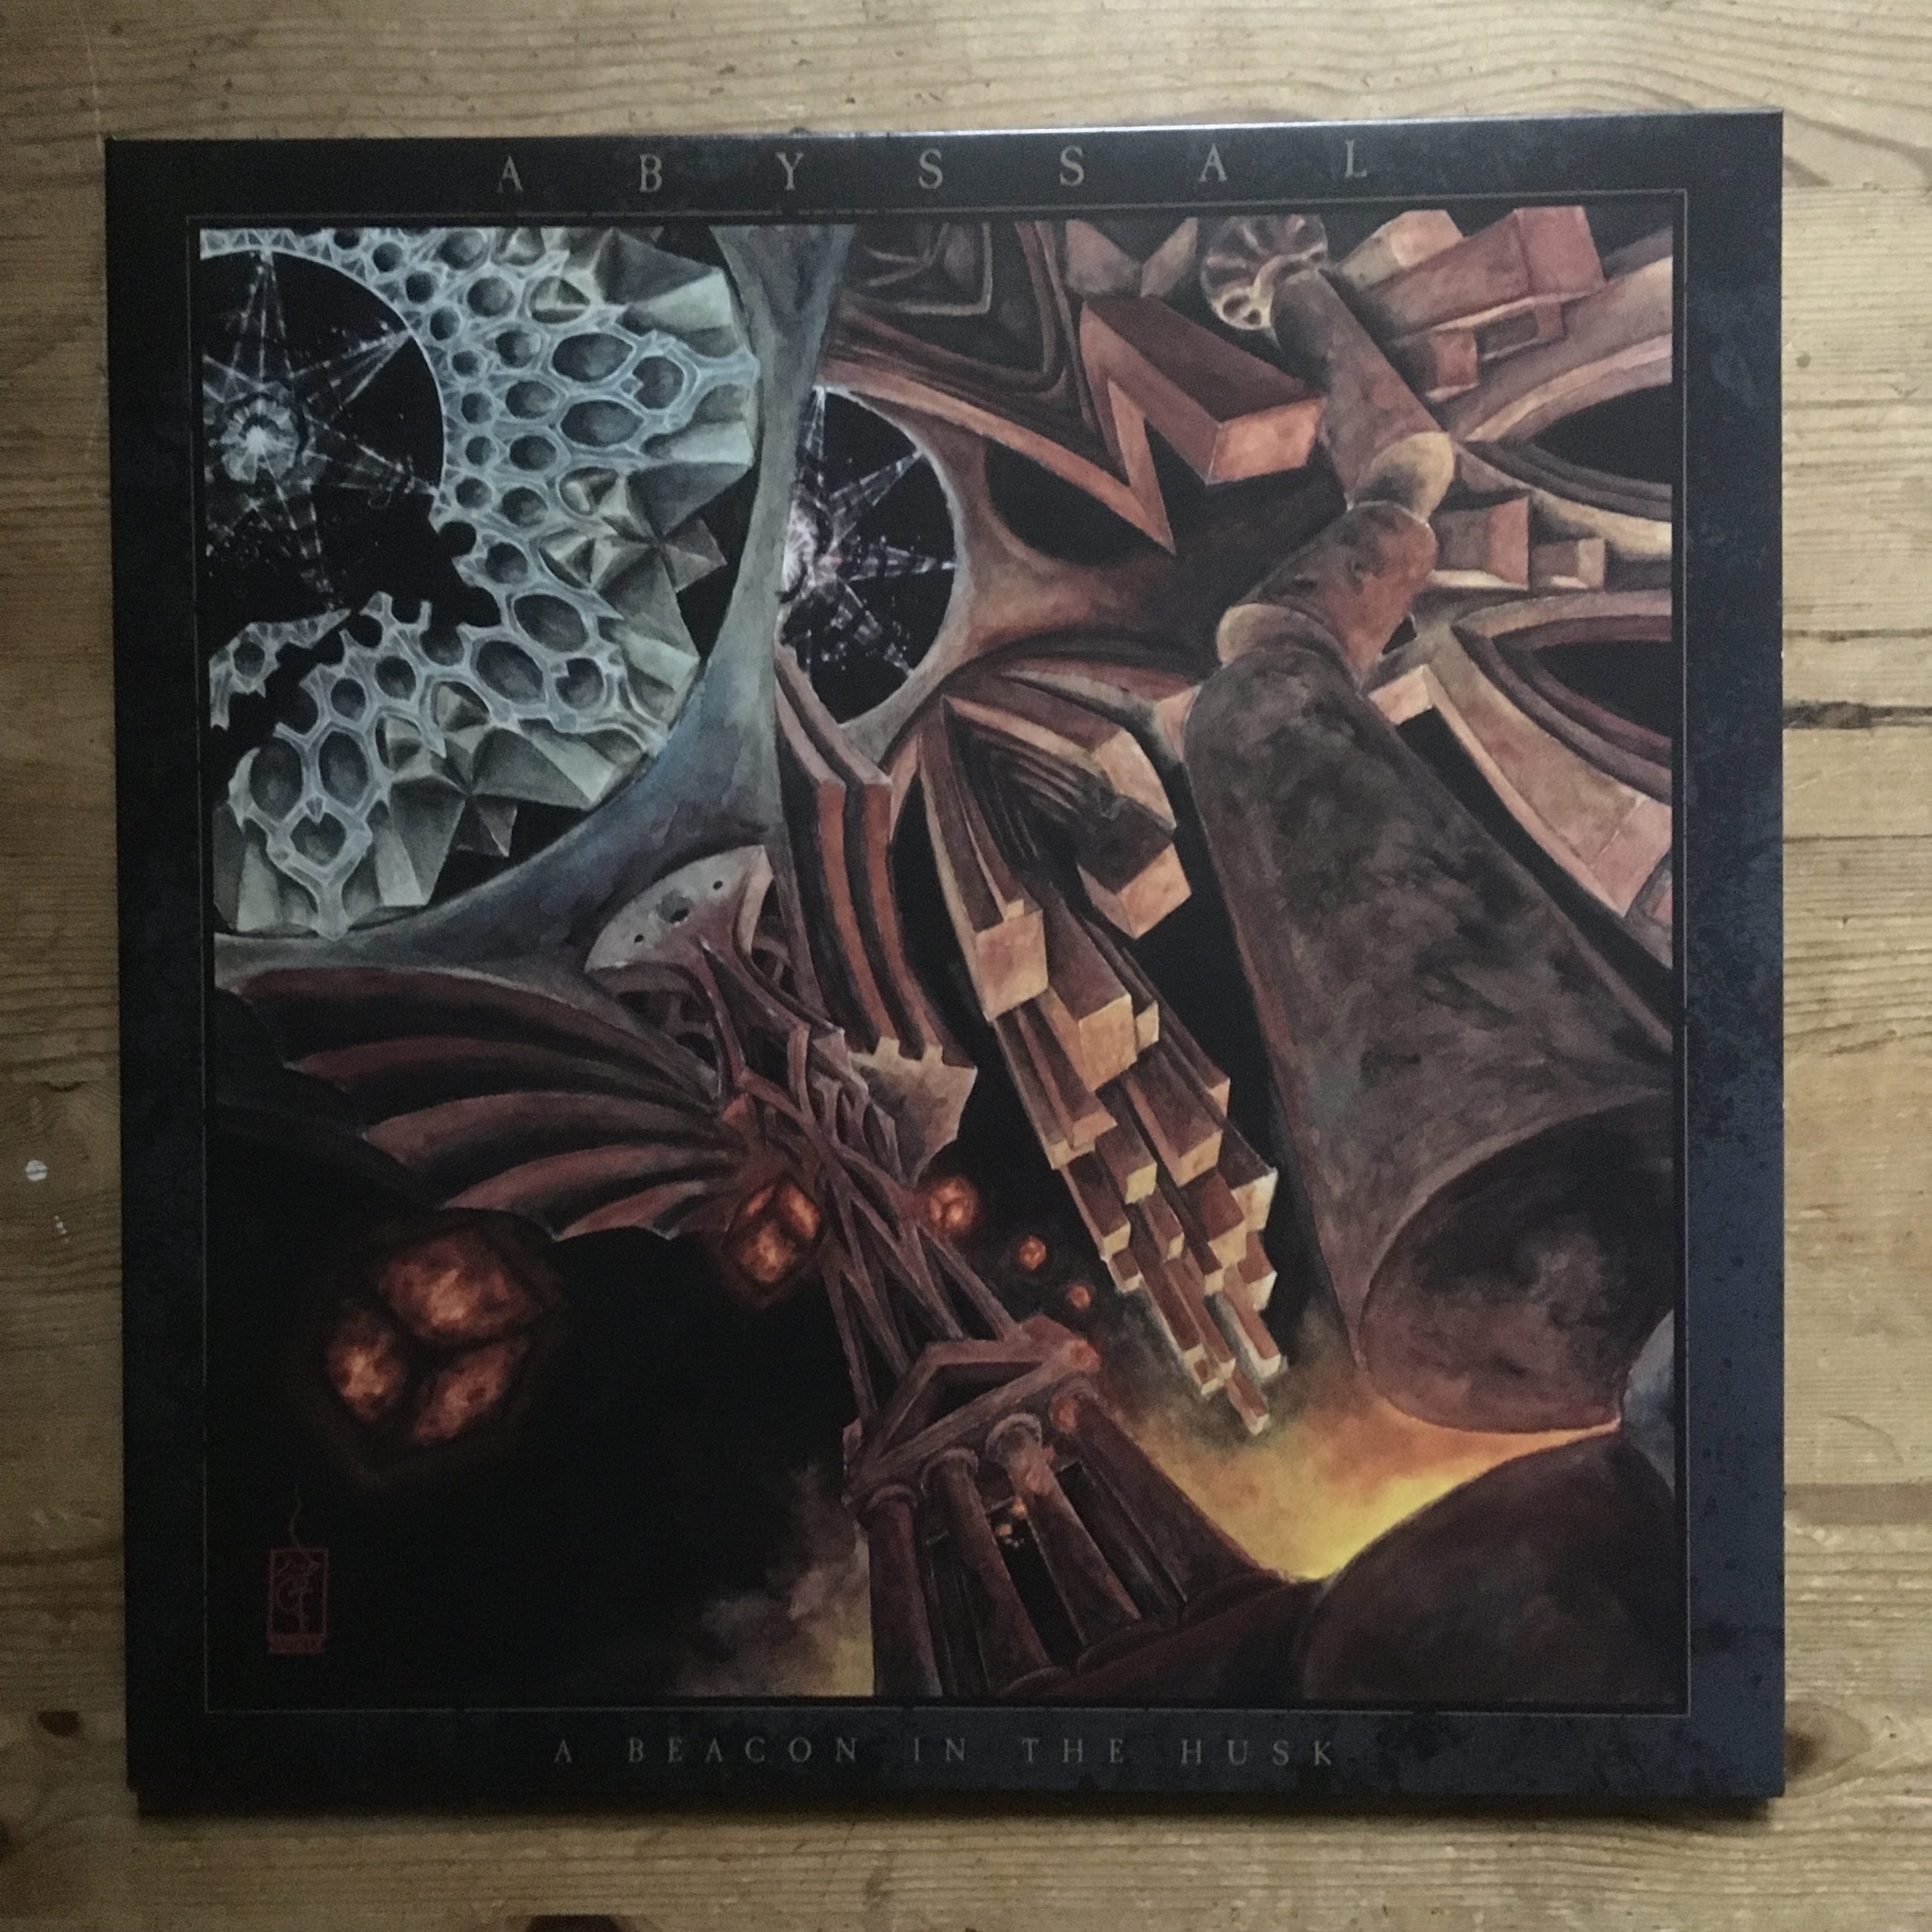 Photo of the Abyssal - "A Beacon in the Husk" 2LP (Black vinyl)